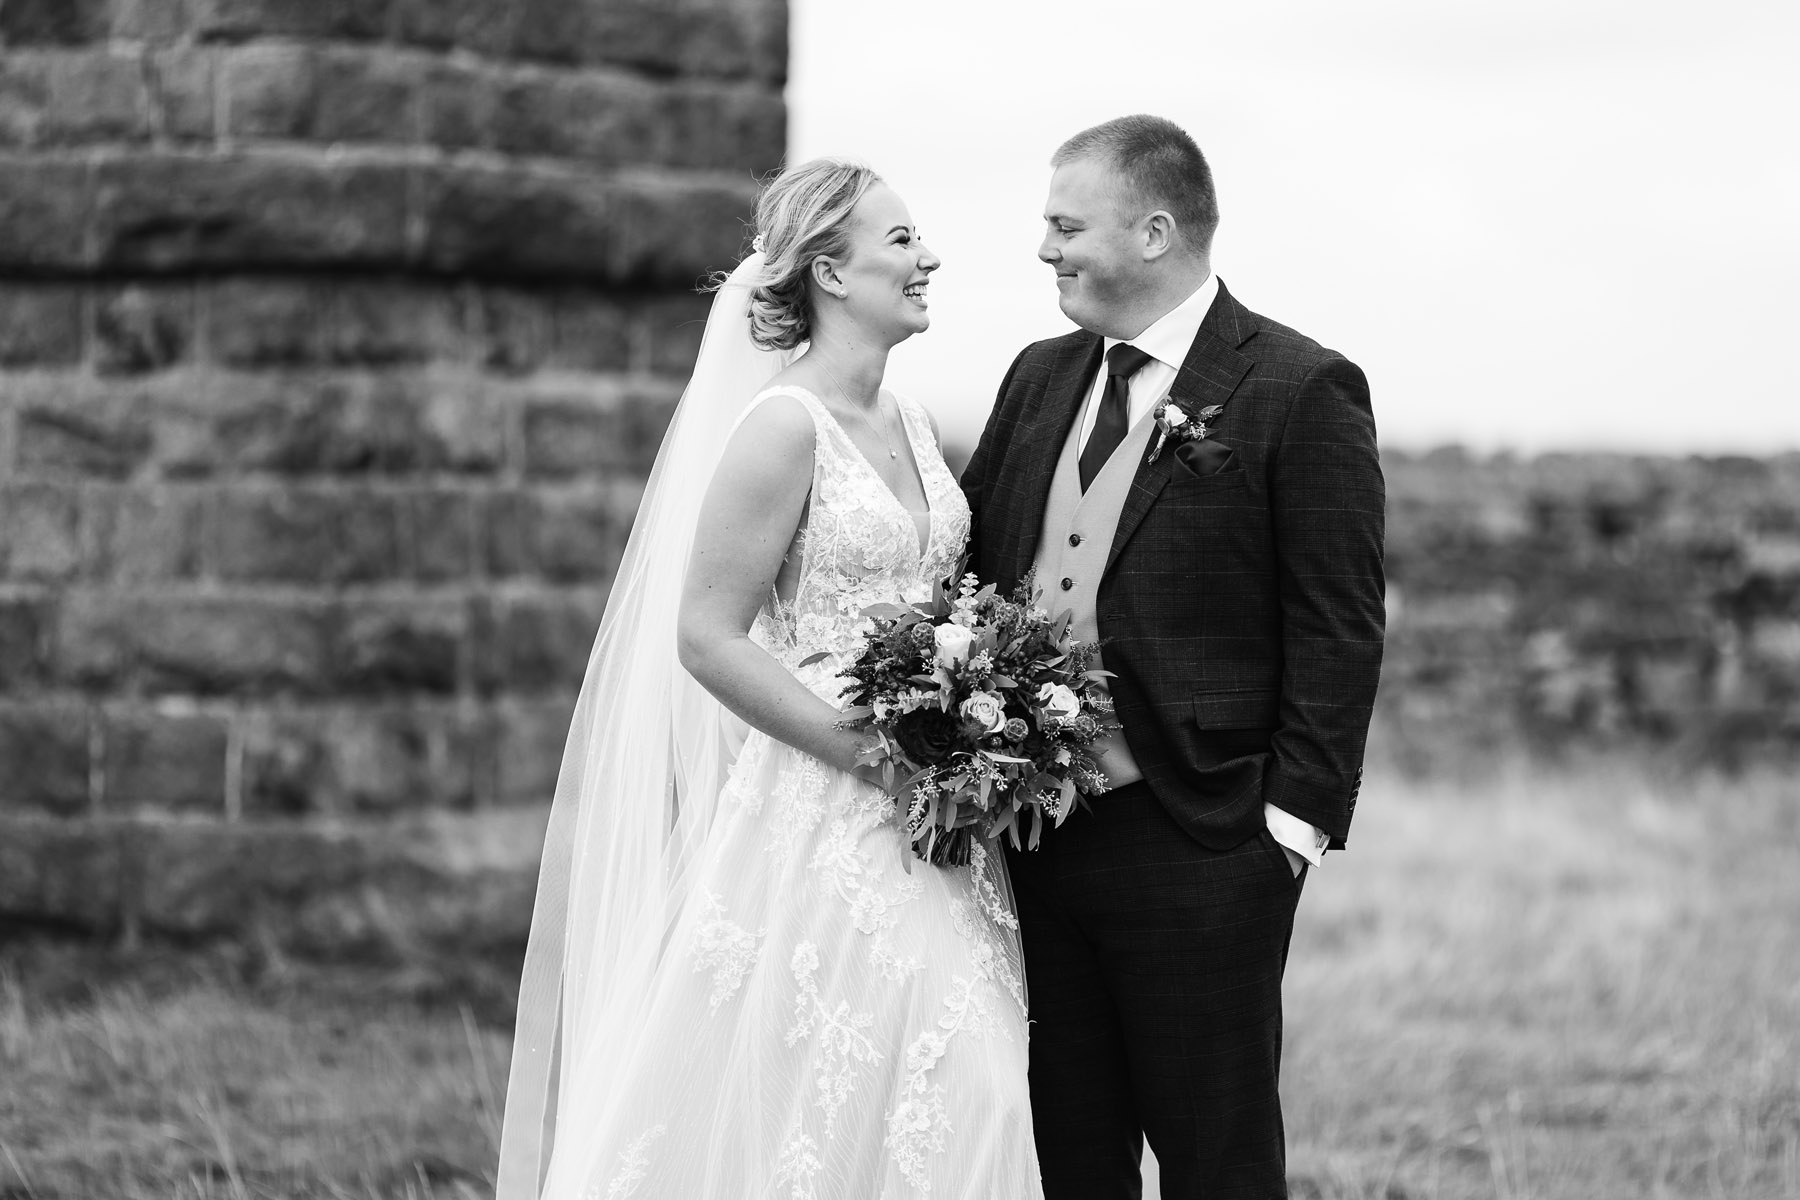 The Out barn Wedding in Autumn